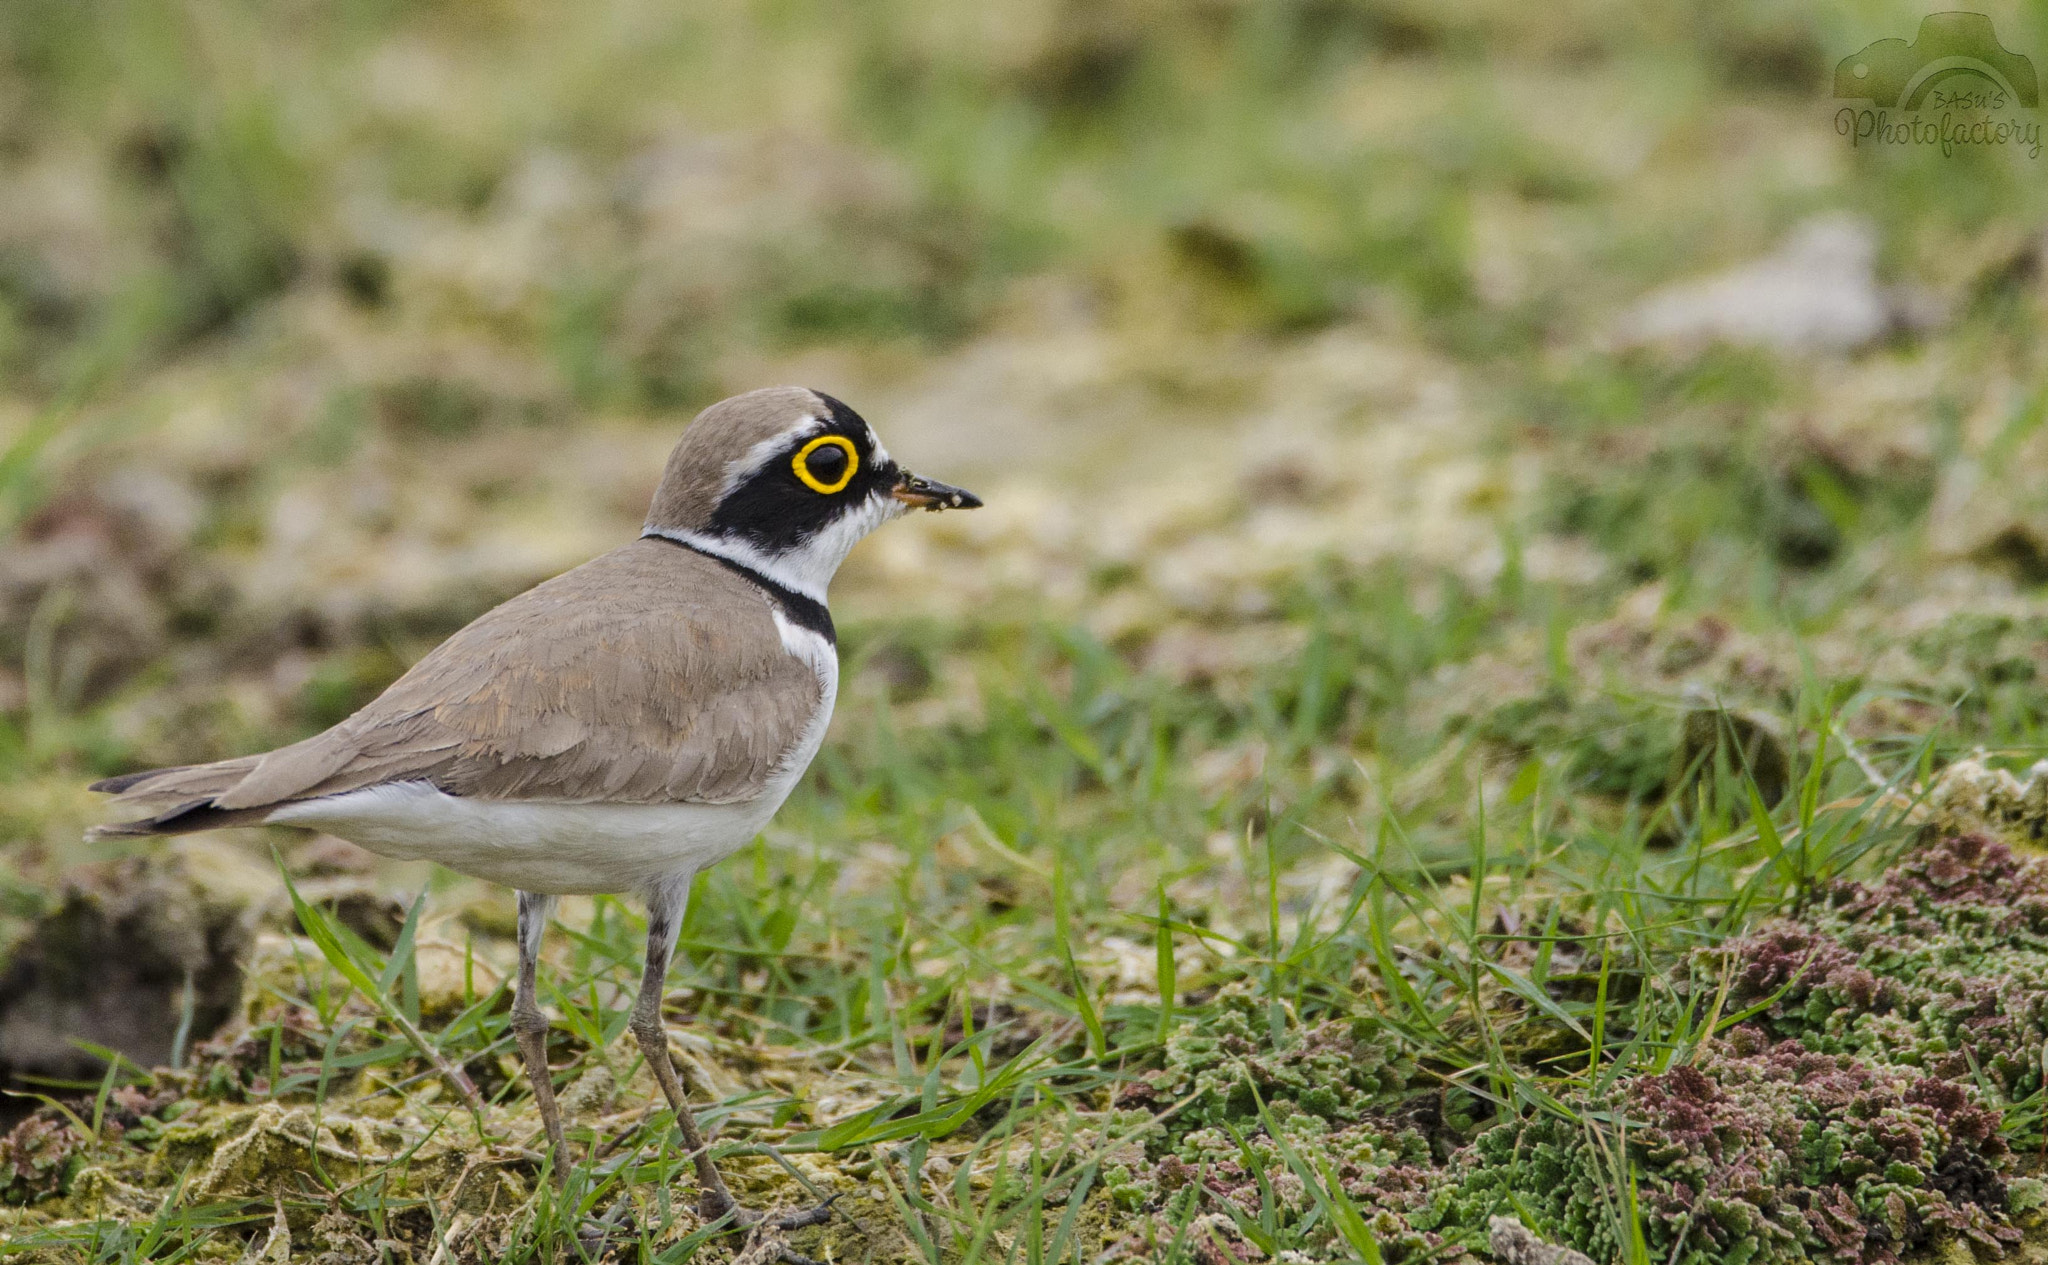 Nikon D7000 + Sigma 150-600mm F5-6.3 DG OS HSM | C sample photo. Little ringed plover photography